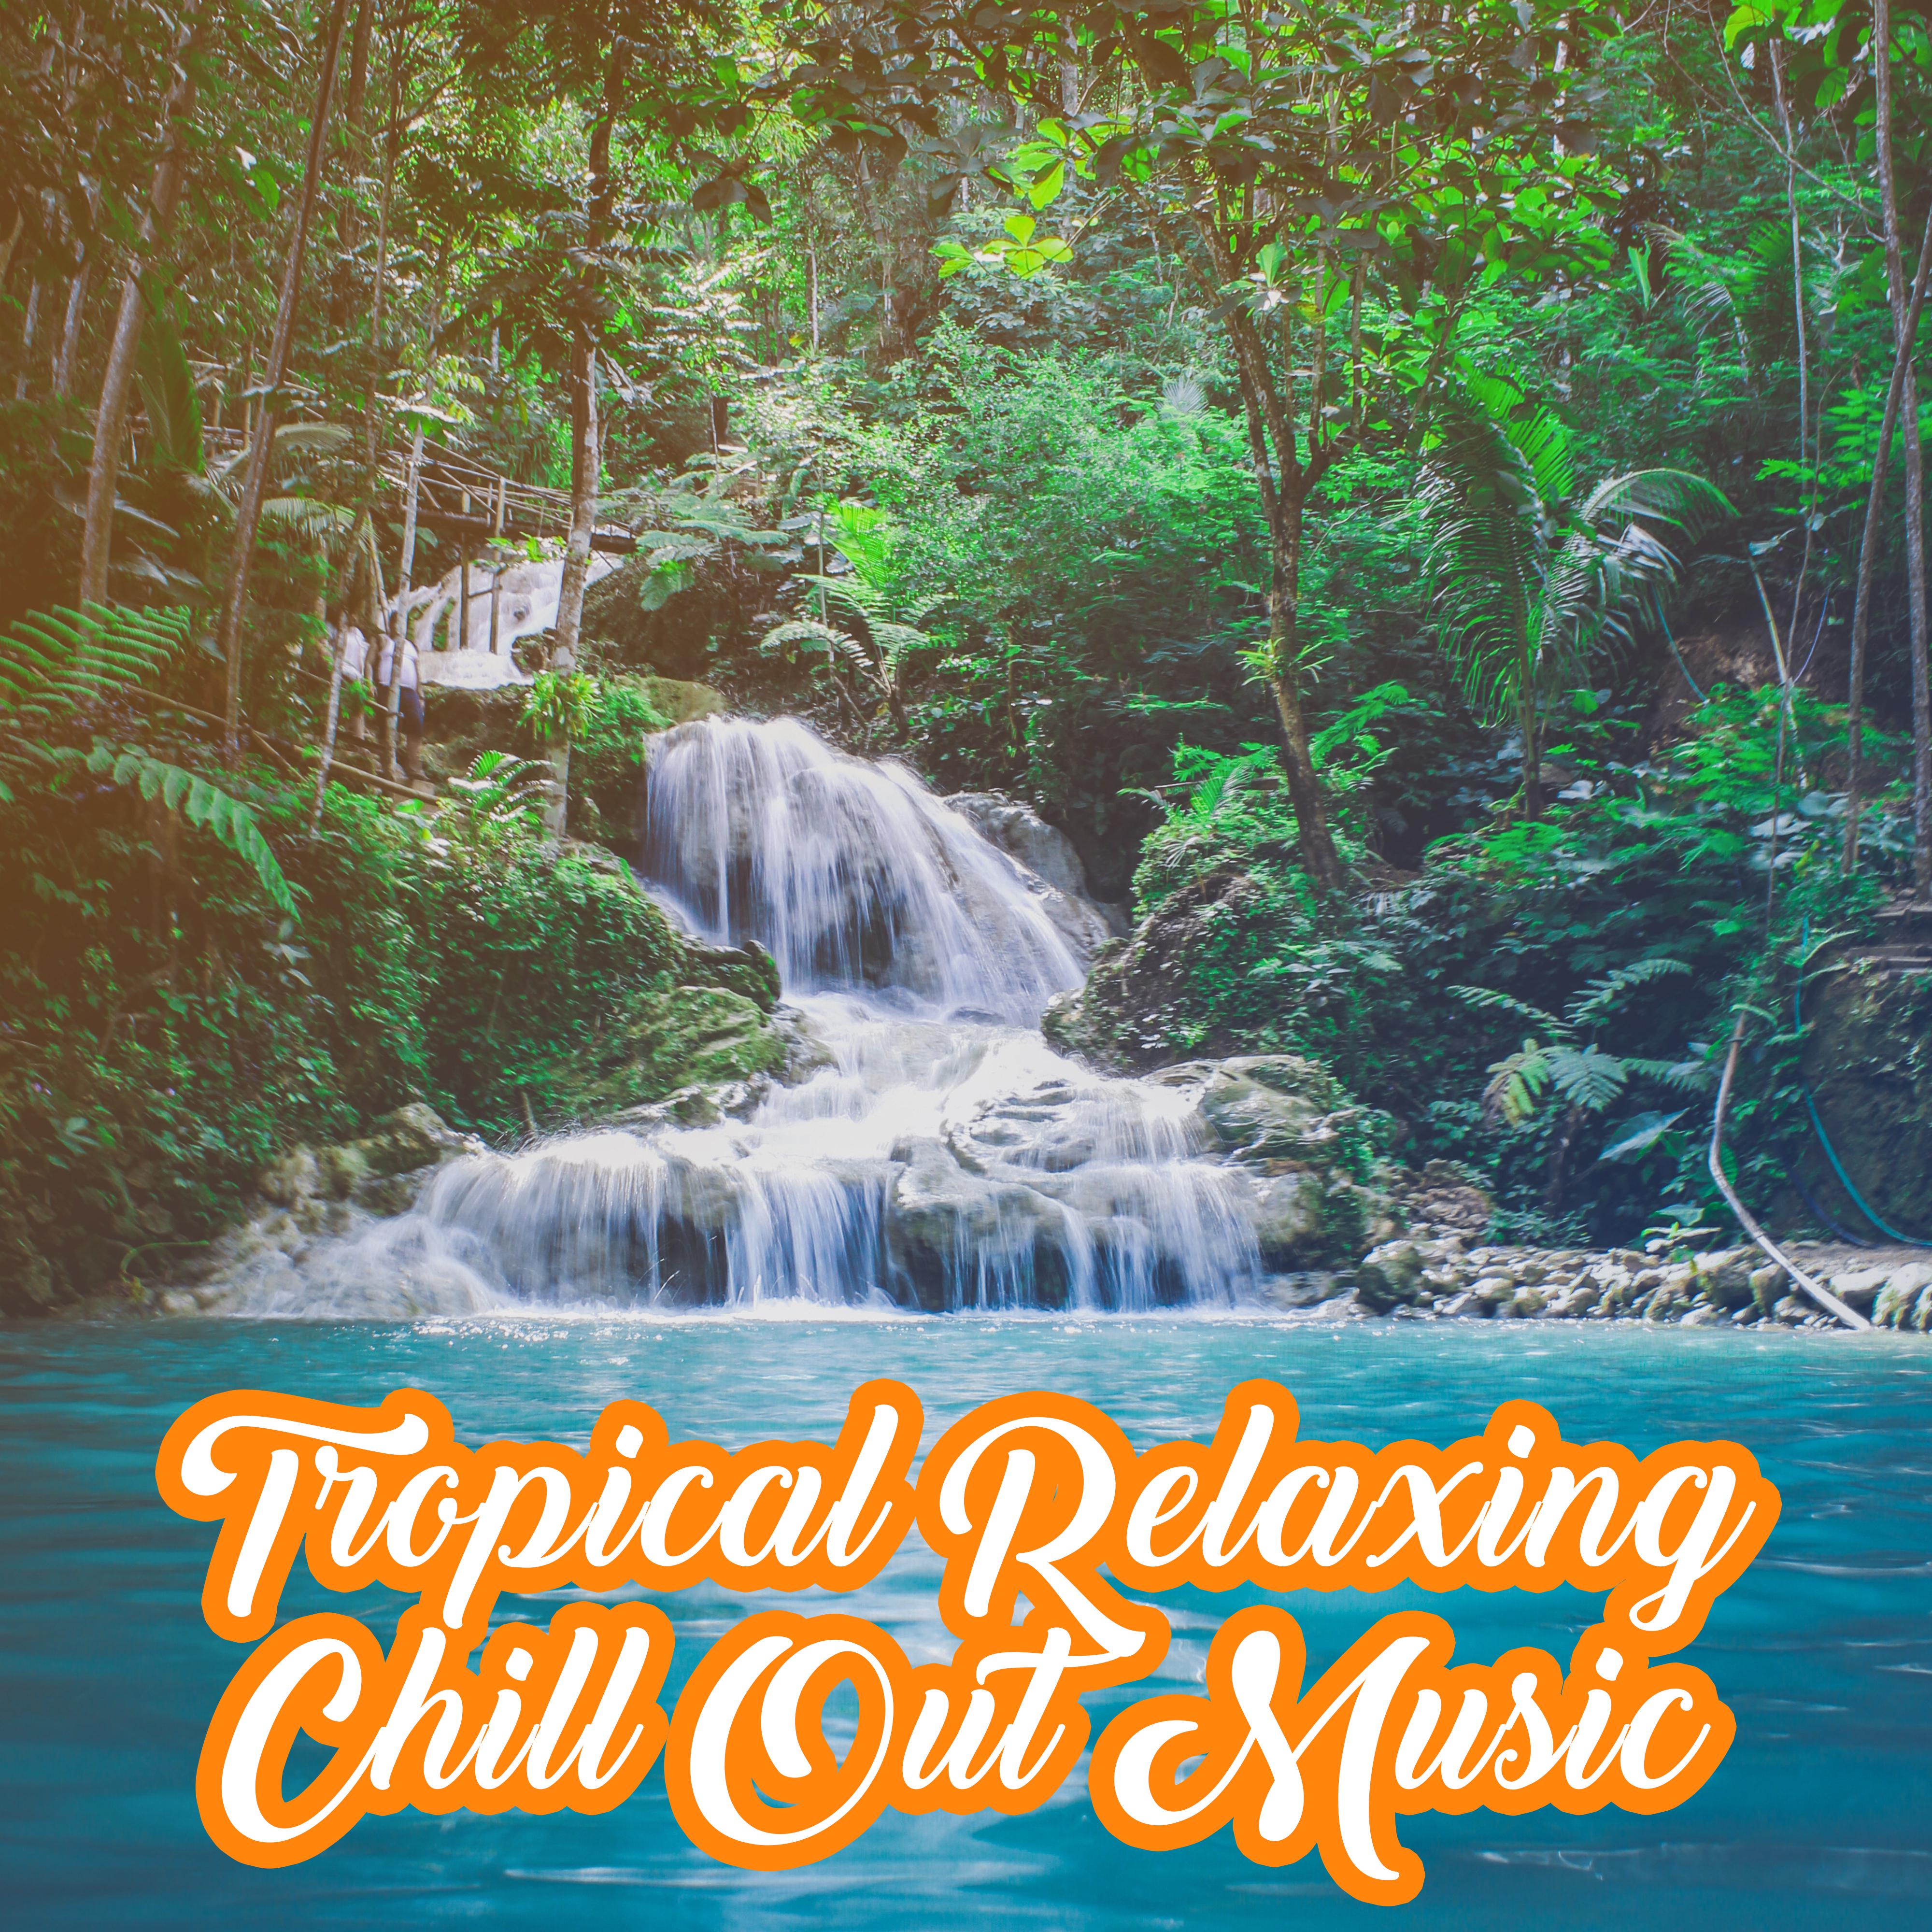 Tropical Relaxing Chill Out Music